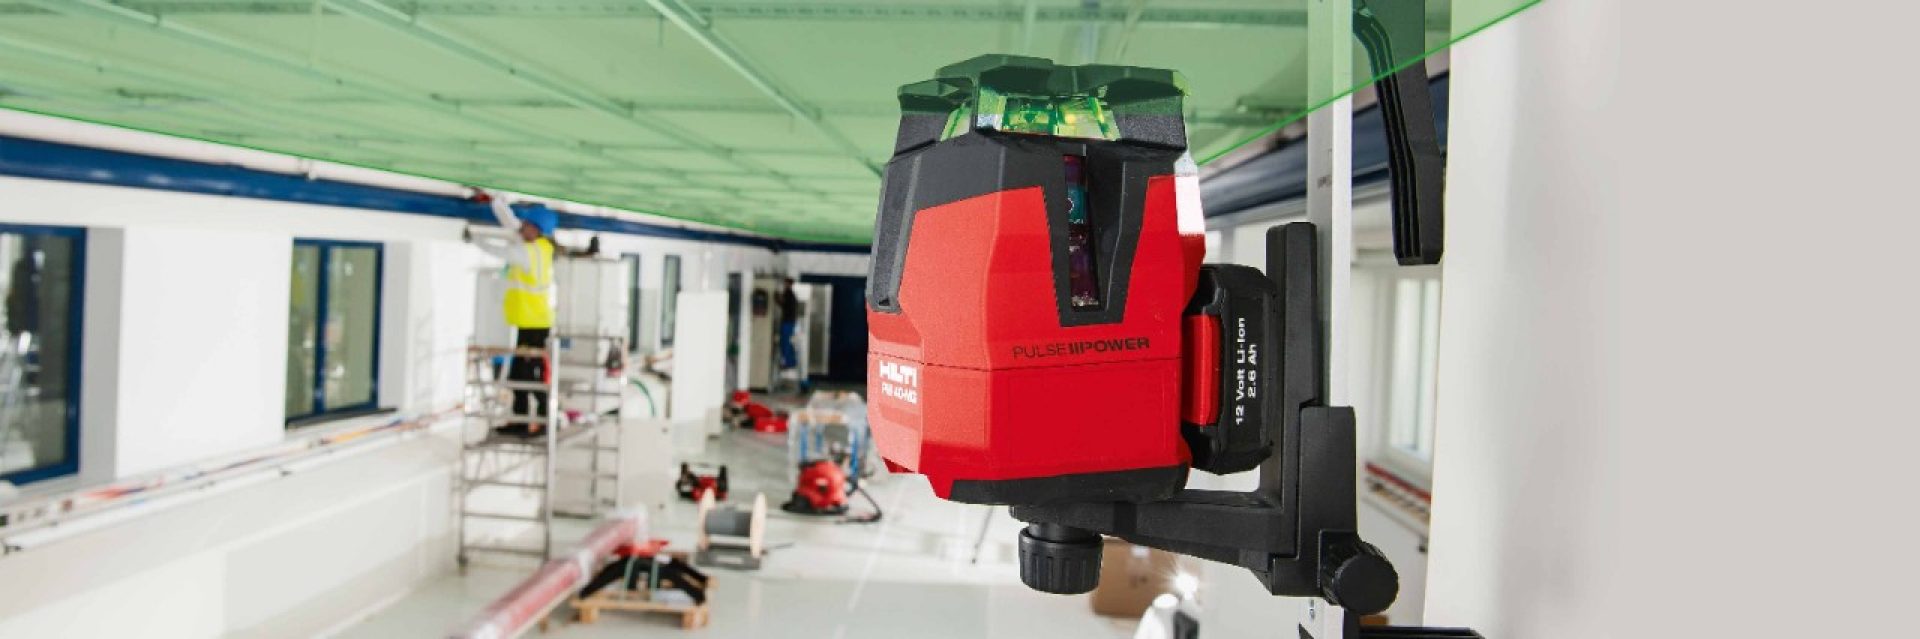 Hilti PM 40-MG green beam multi-line laser for aligning, plumbing, squaring and leveling